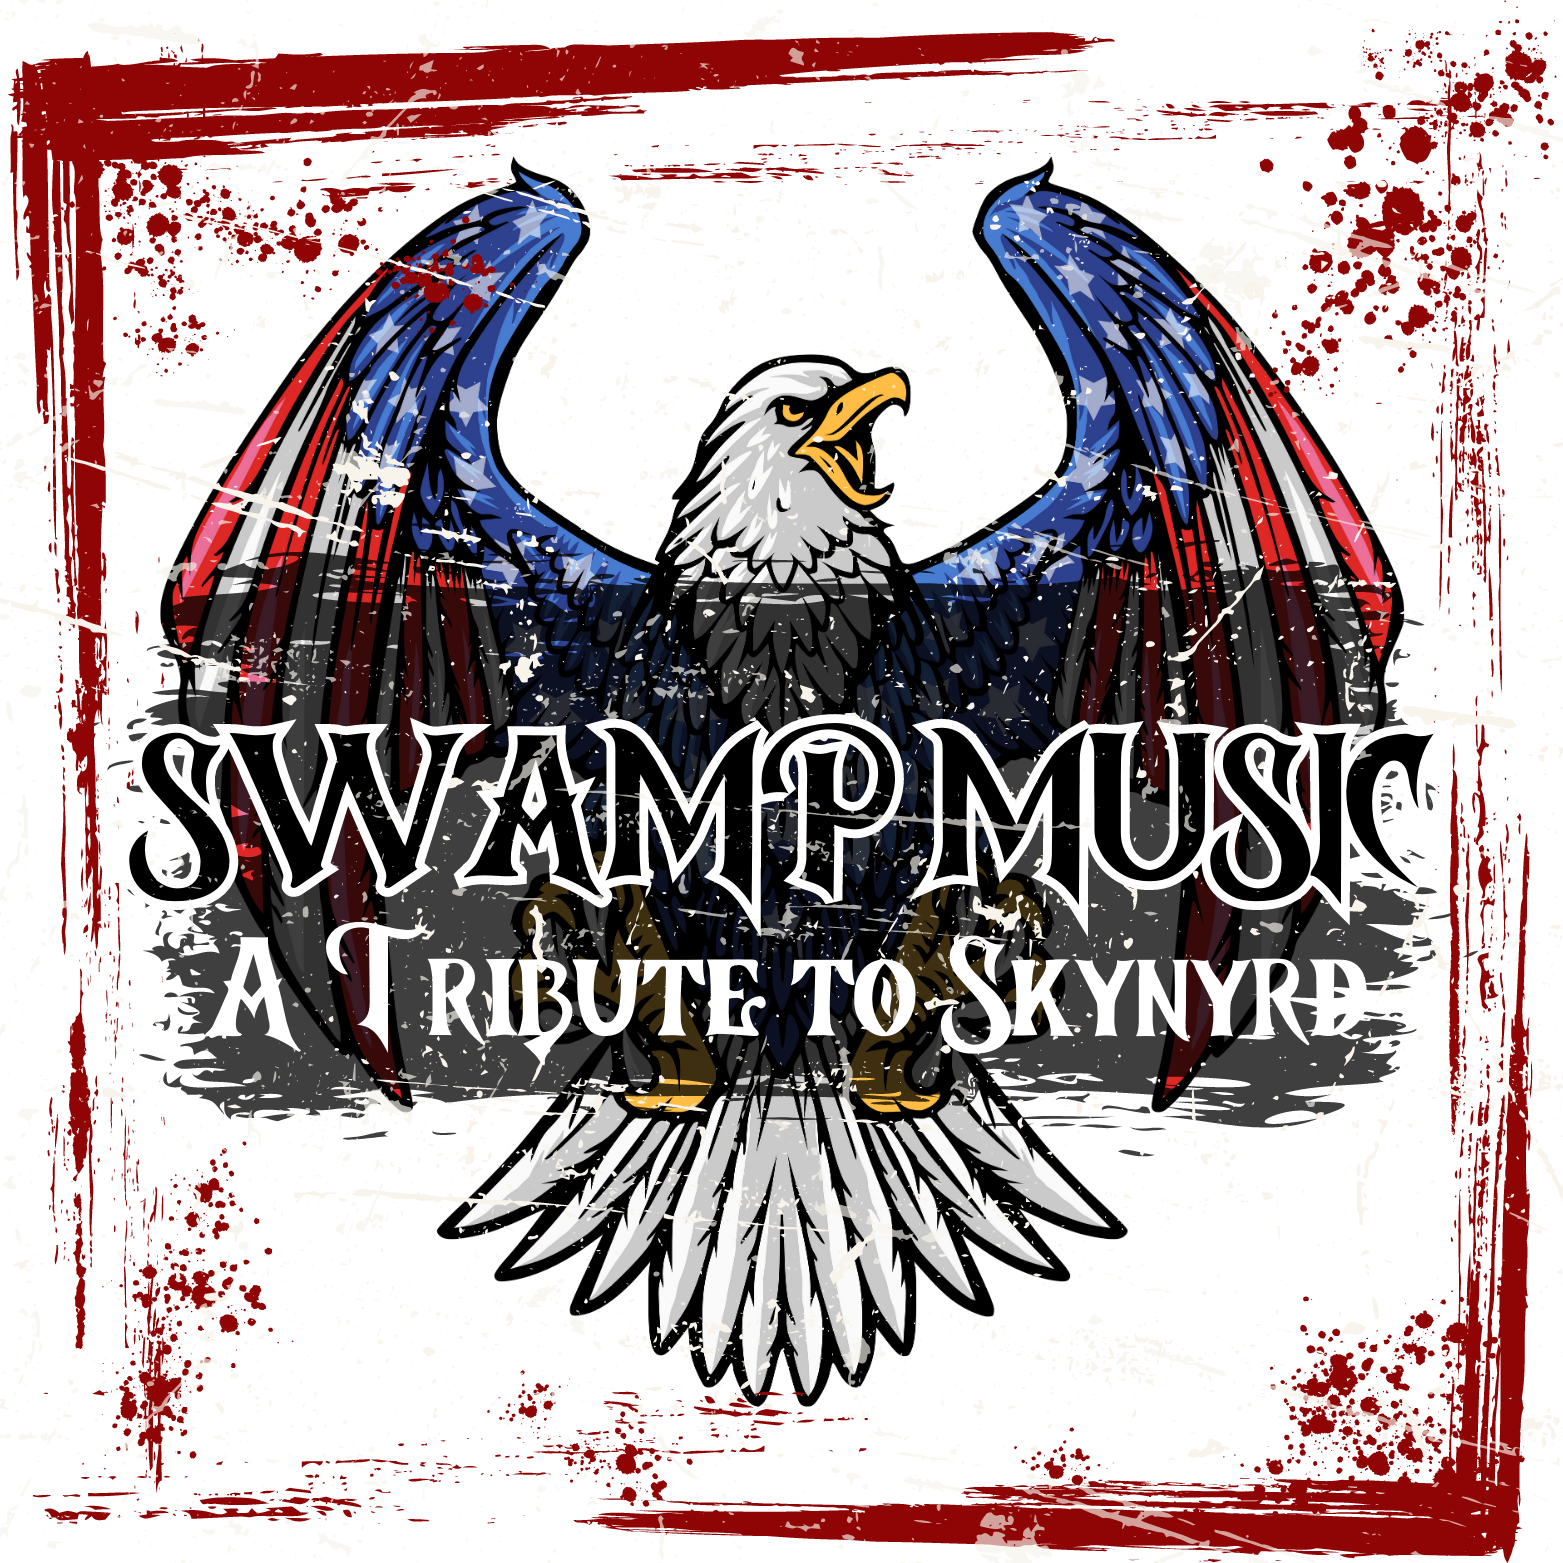 Swamp Music - A Tribute to Skynyrd